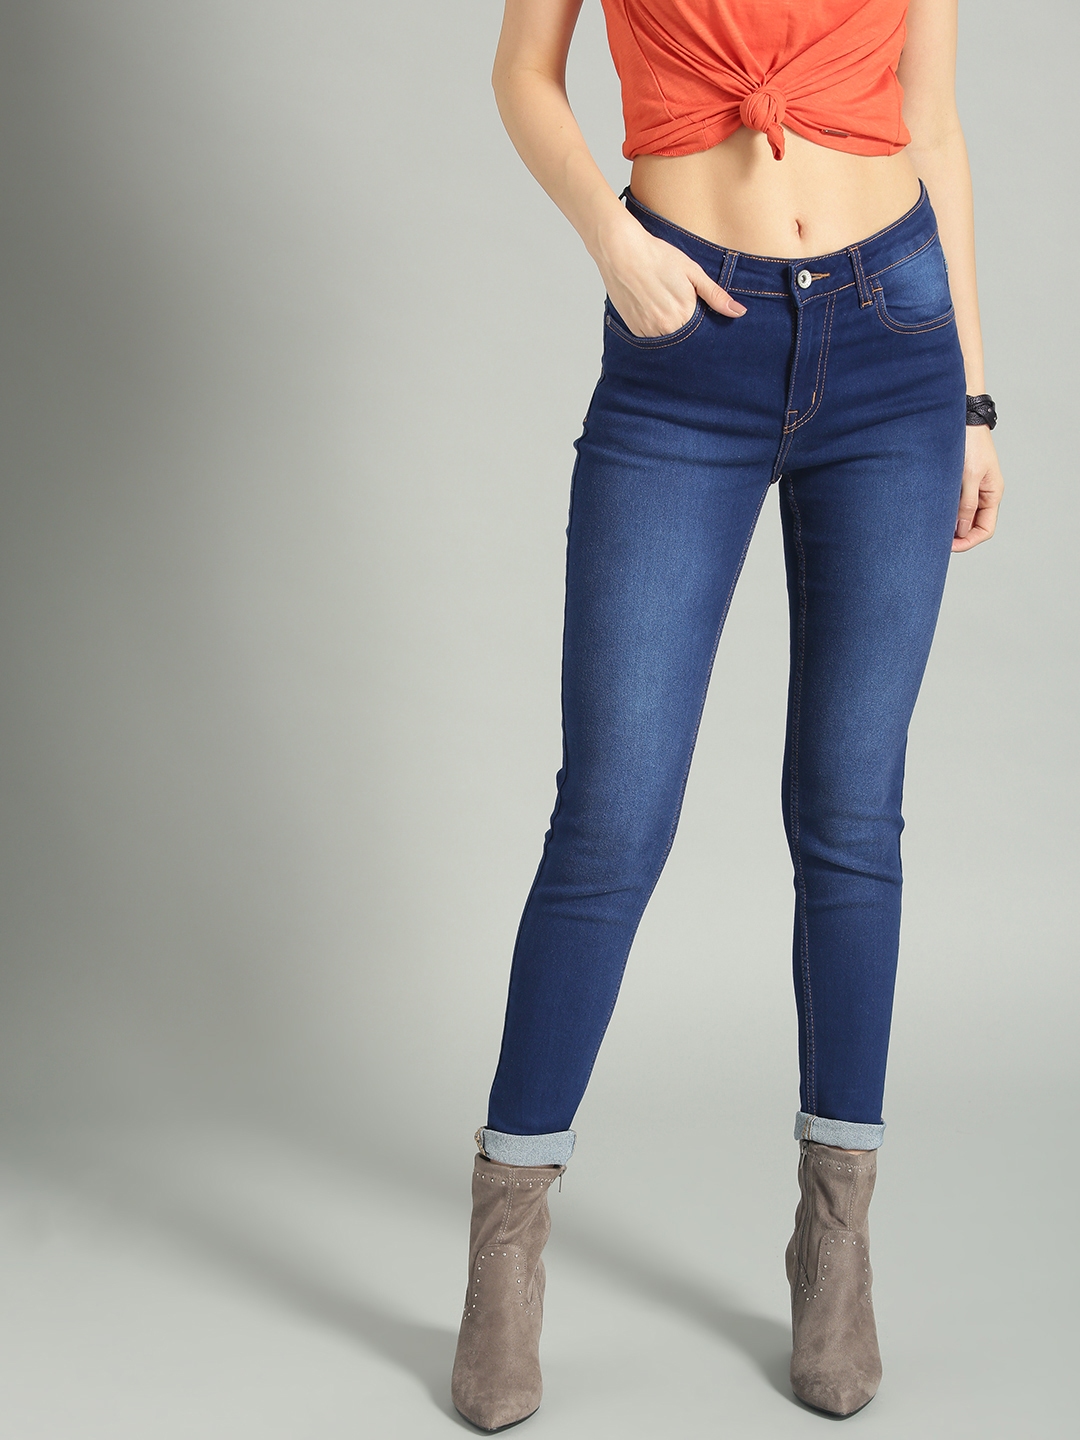 Buy Roadster Women Blue Skinny Fit Mid Rise Clean Look Stretchable Jeans - Jeans for Women 